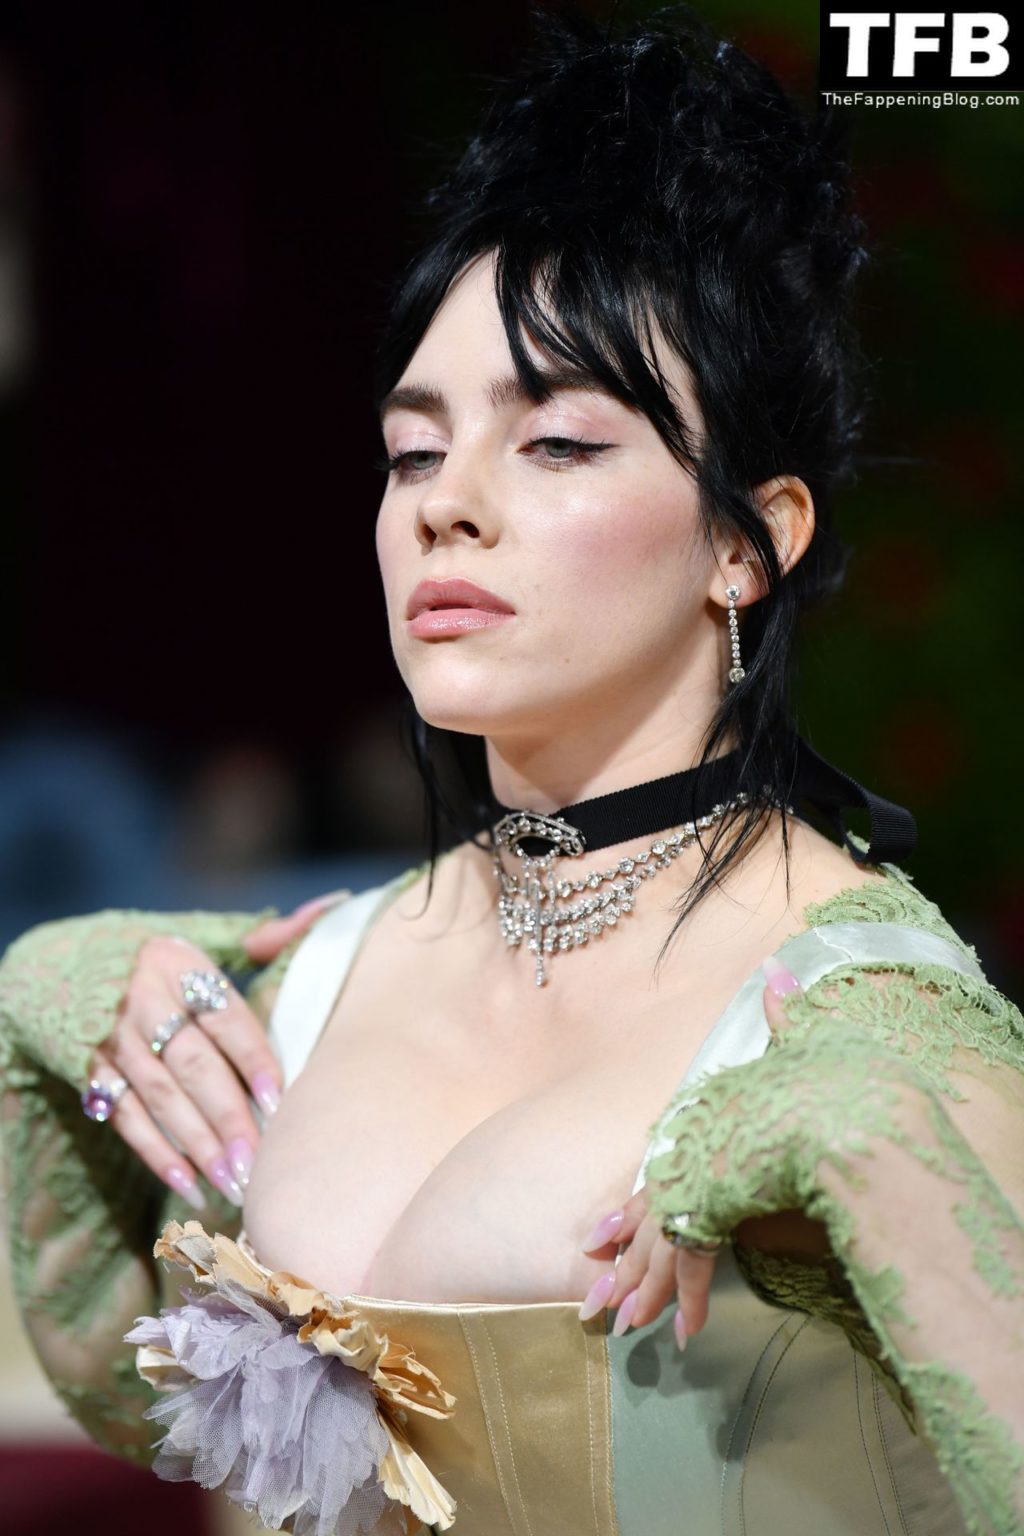 Billie Eilish Sexy The Fappening Blog 139 1024x1536 - Billie Eilish Showcases Nice Cleavage at The 2022 Met Gala in NYC (155 Photos)